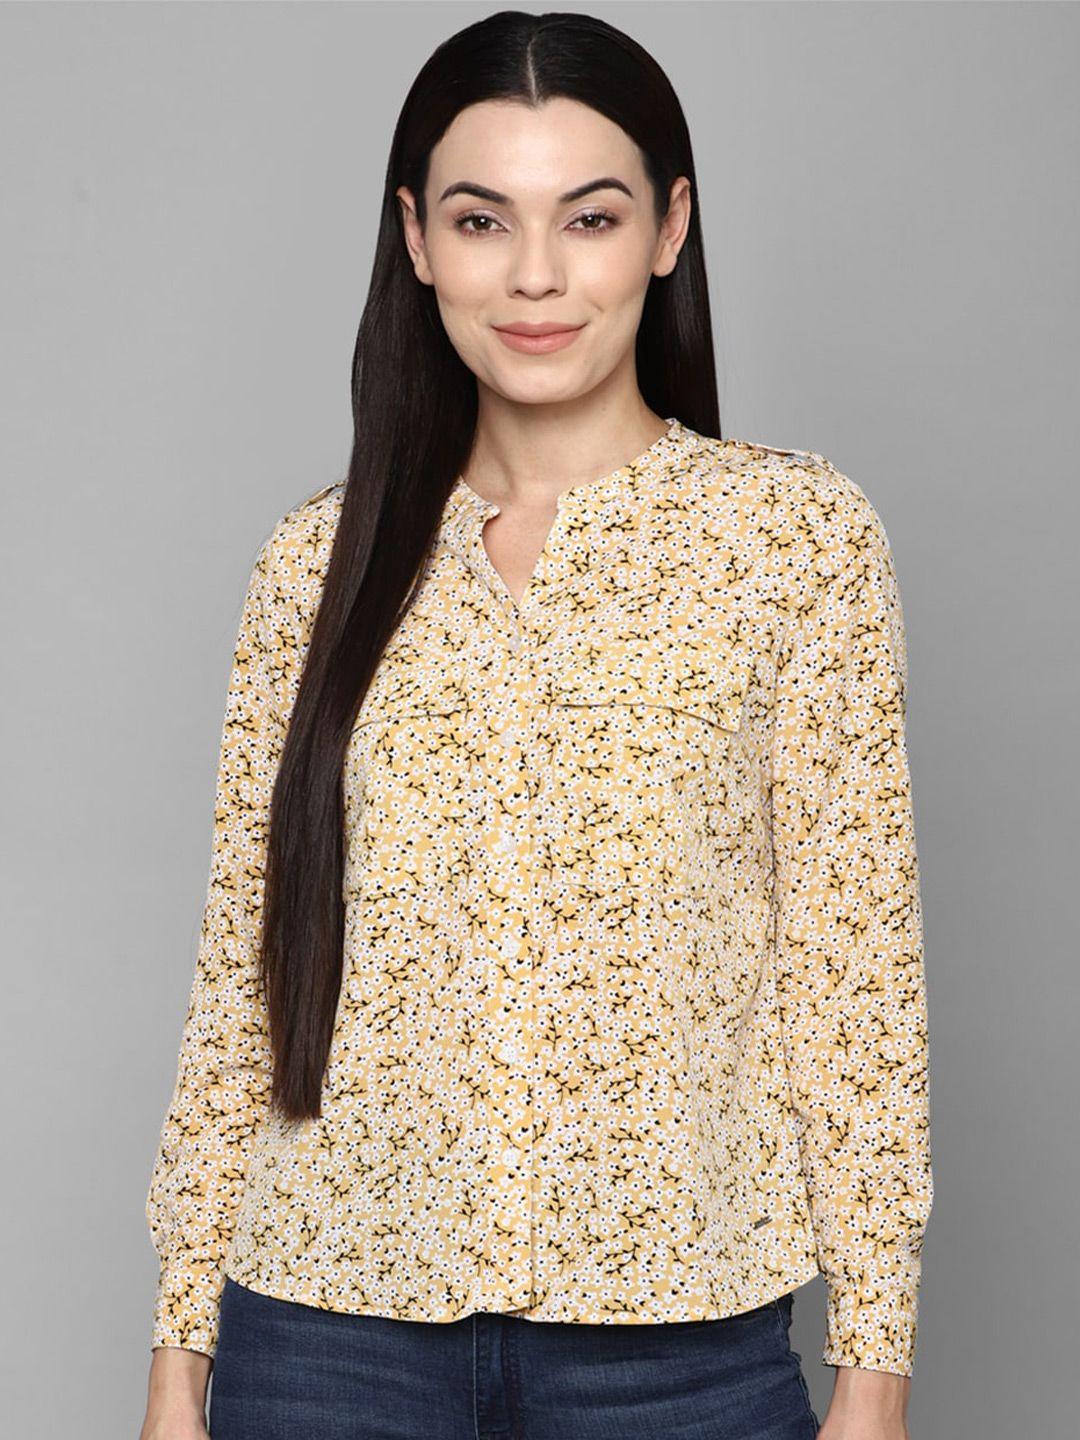 allen-solly-woman-women-yellow-floral-printed-casual-shirt